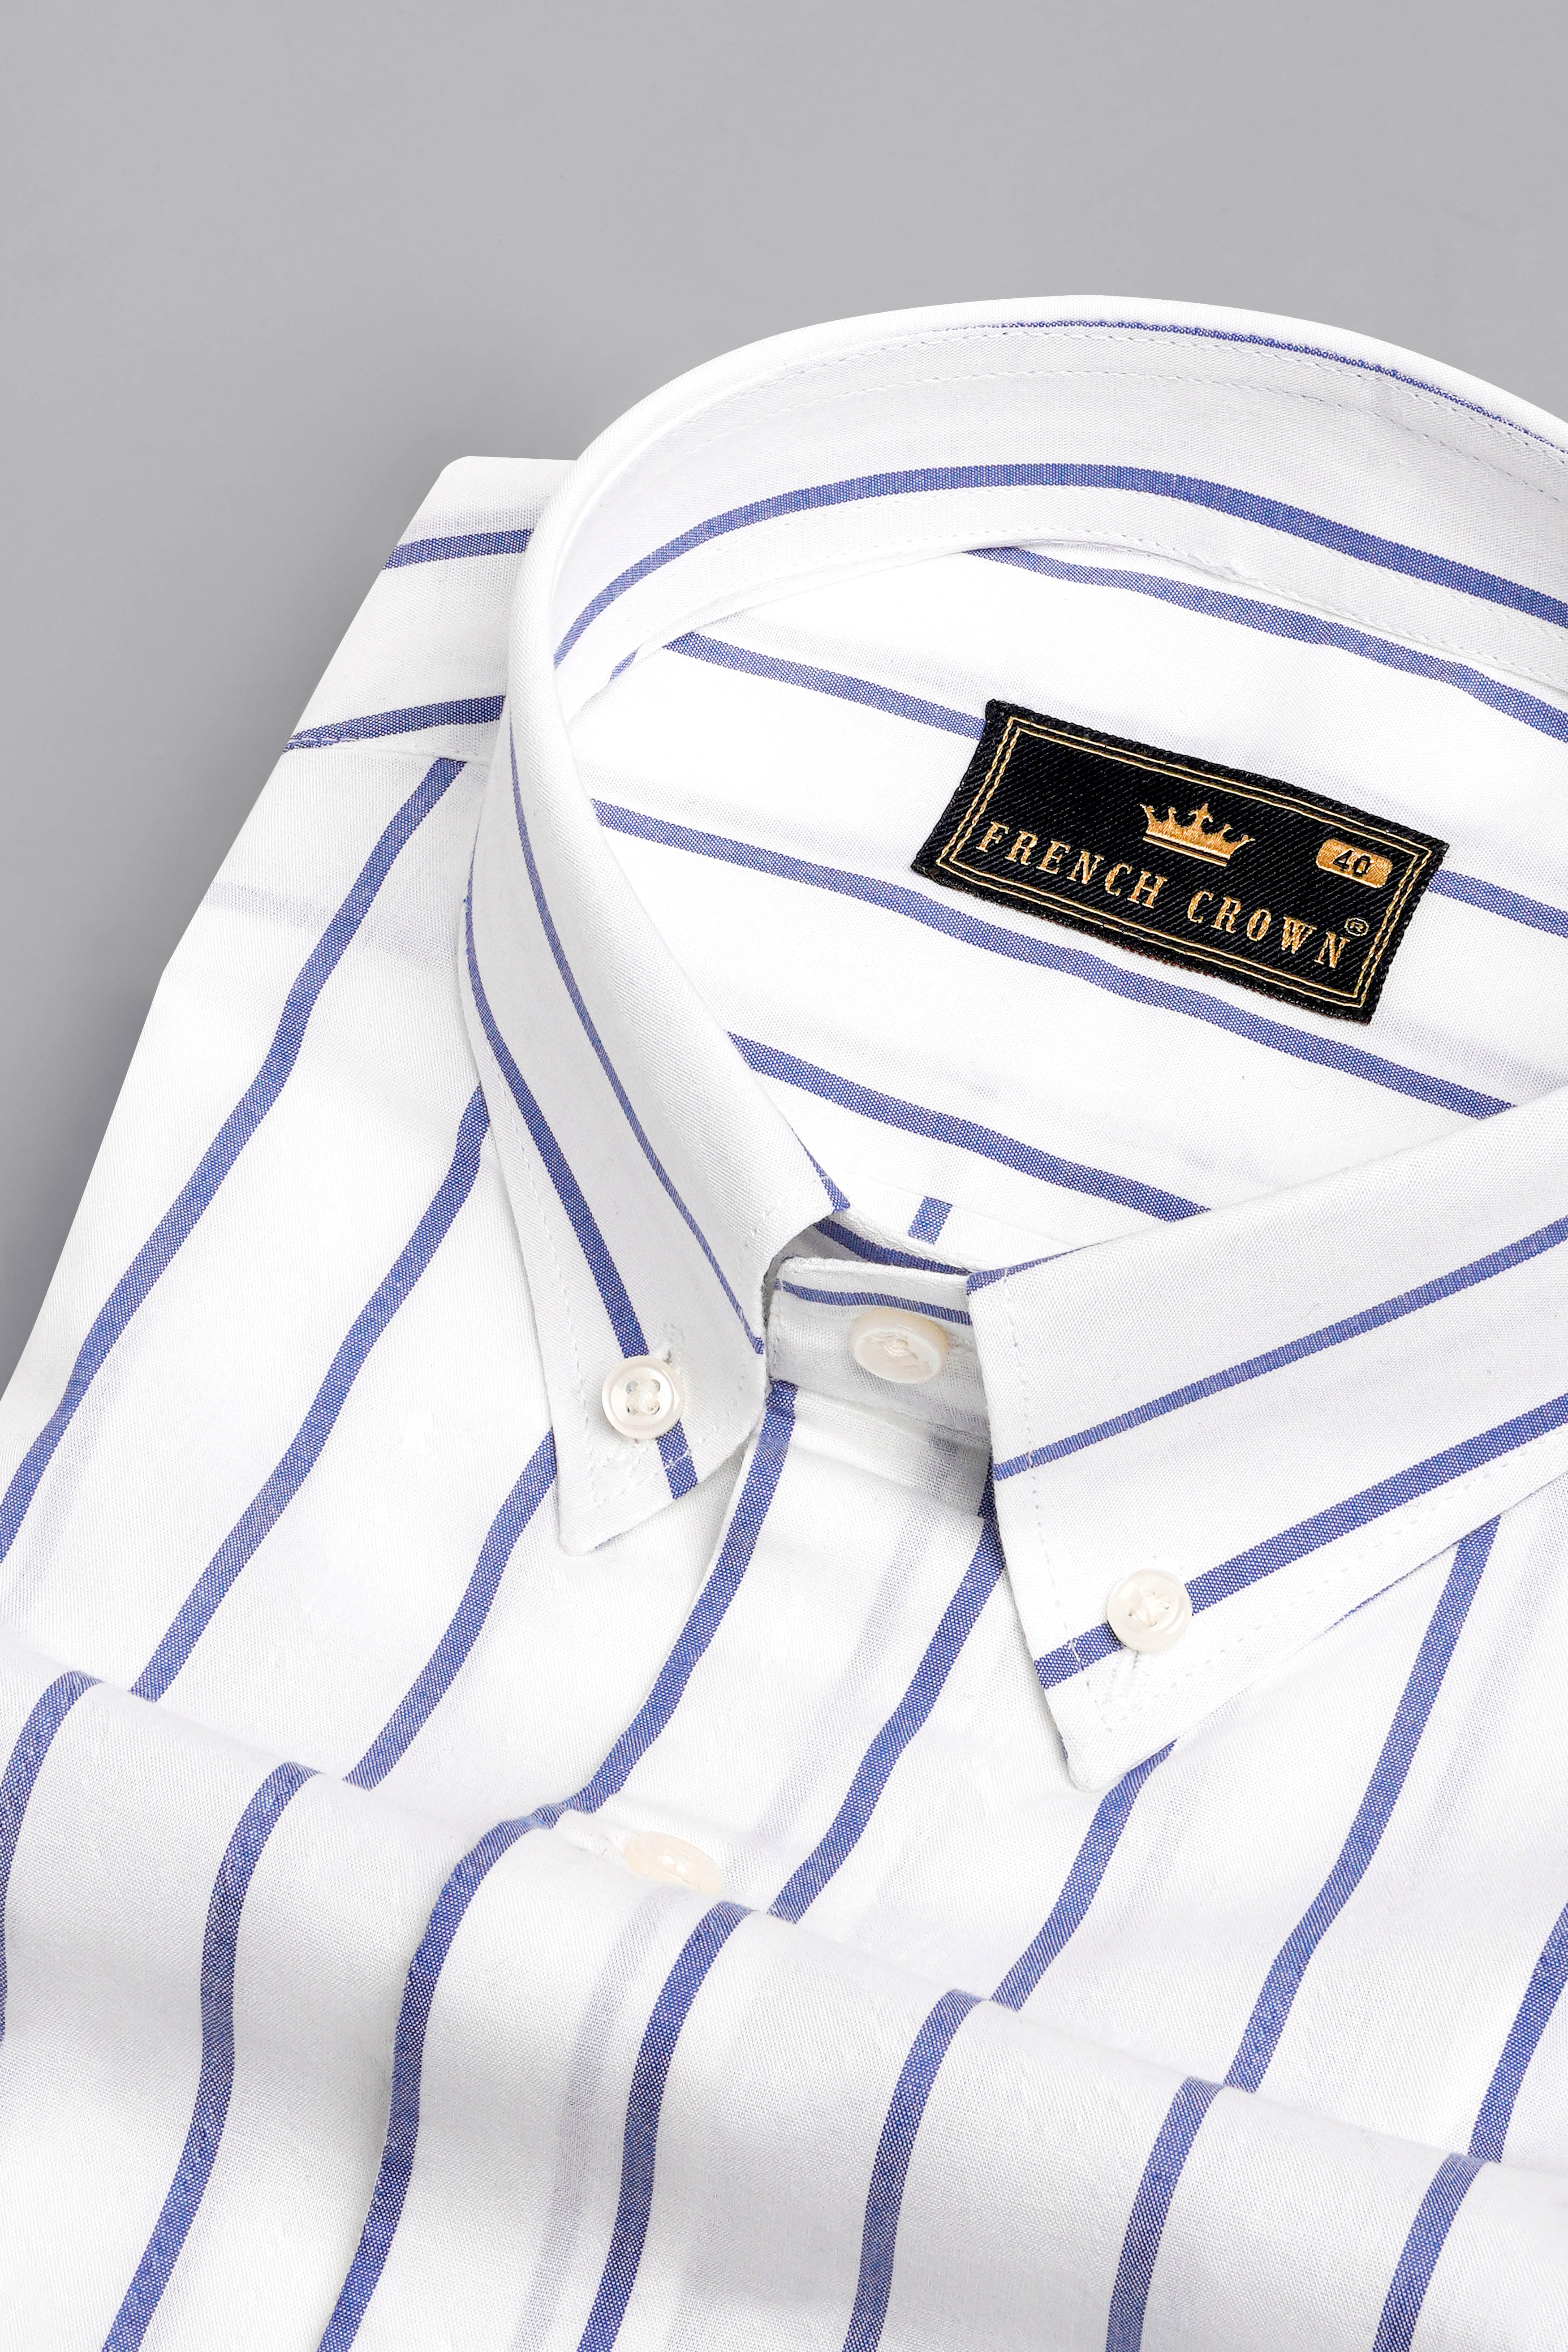 Bright White with Faded Blue Striped Premium Cotton Shirt